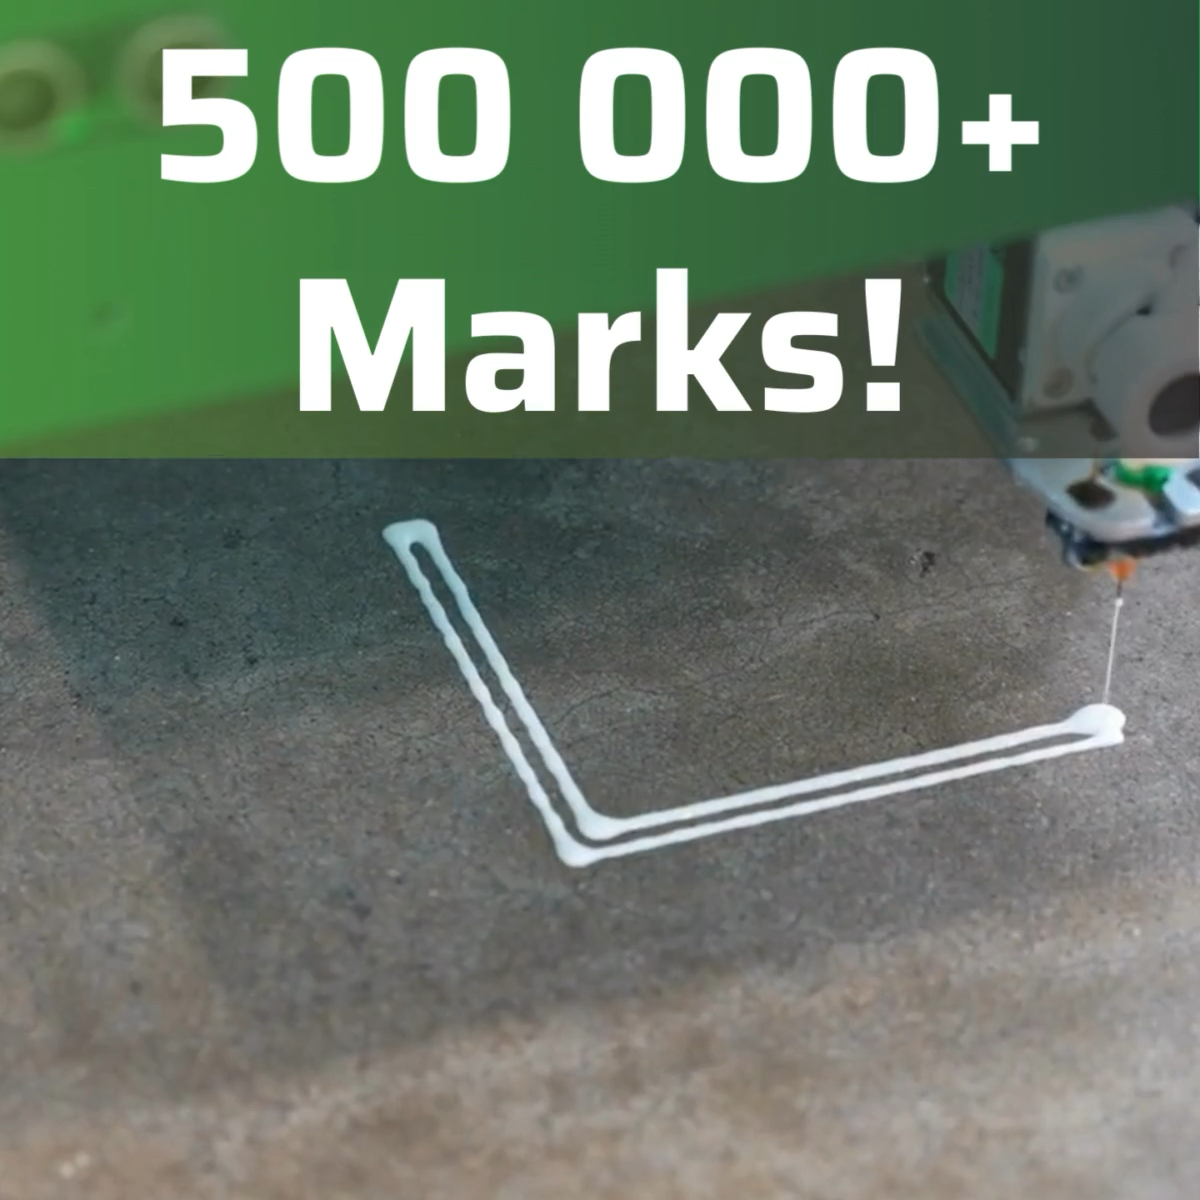 500,000+ Marks and counting!